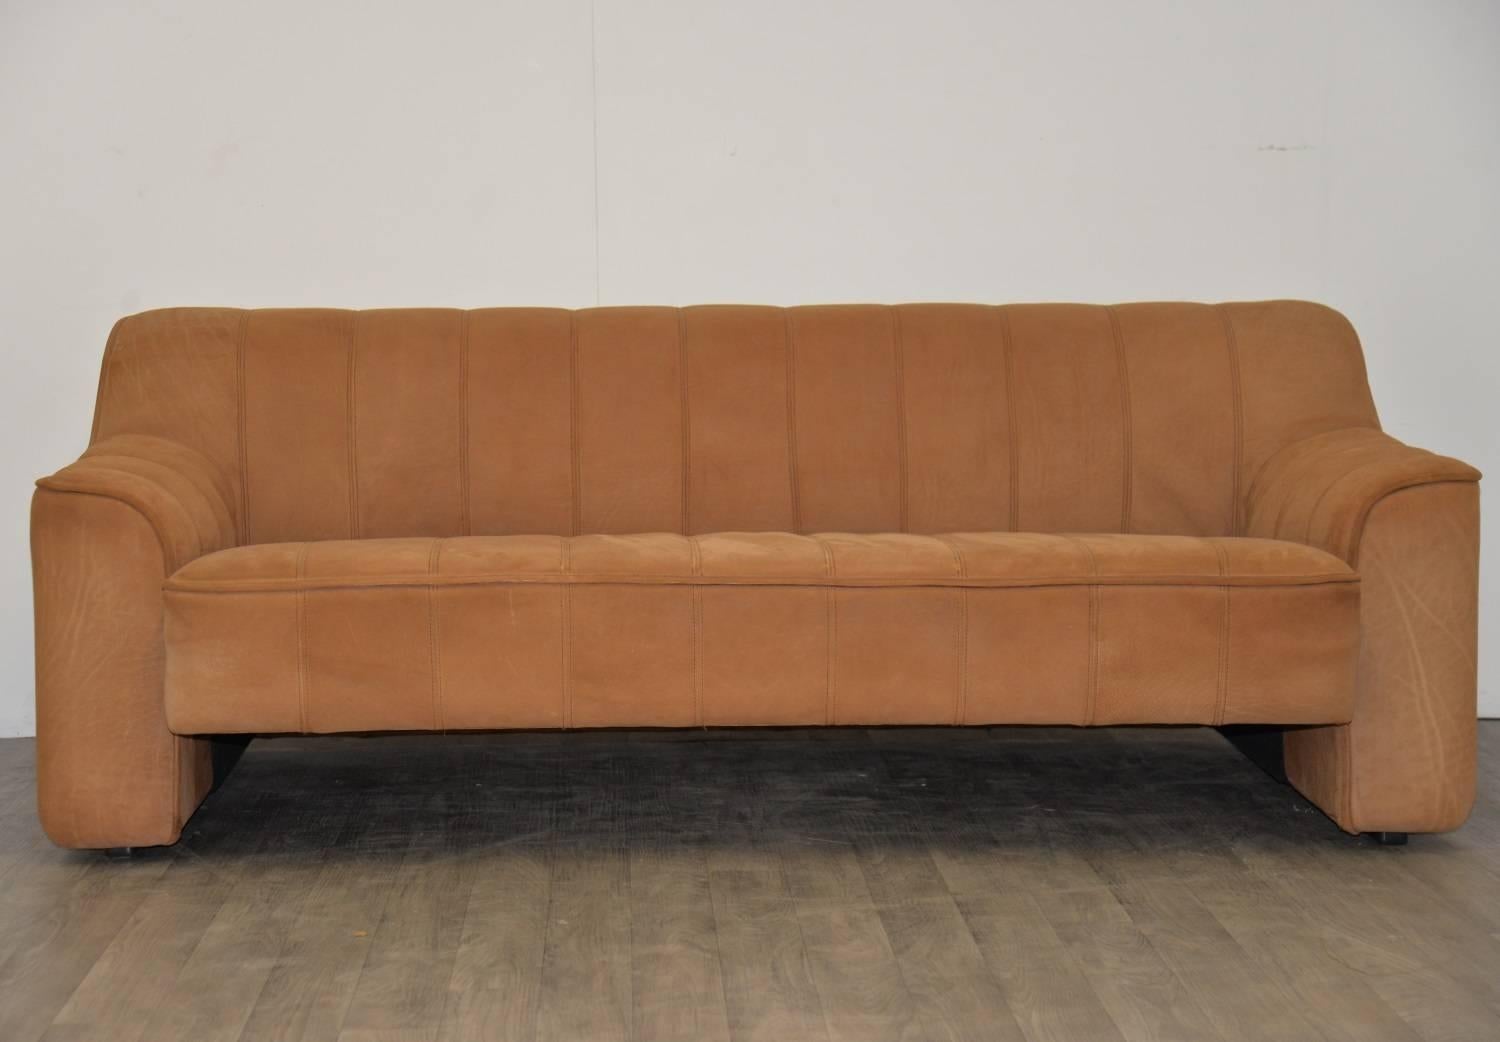 Discounted airfreight for our US Continent customers (2 weeks door to door)
Try before you buy service for our UK mainland customers
Returns accepted 

Vintage 1970s De Sede DS 44 three-seat sofa and daybed in thick buffalo leather. Built  circa